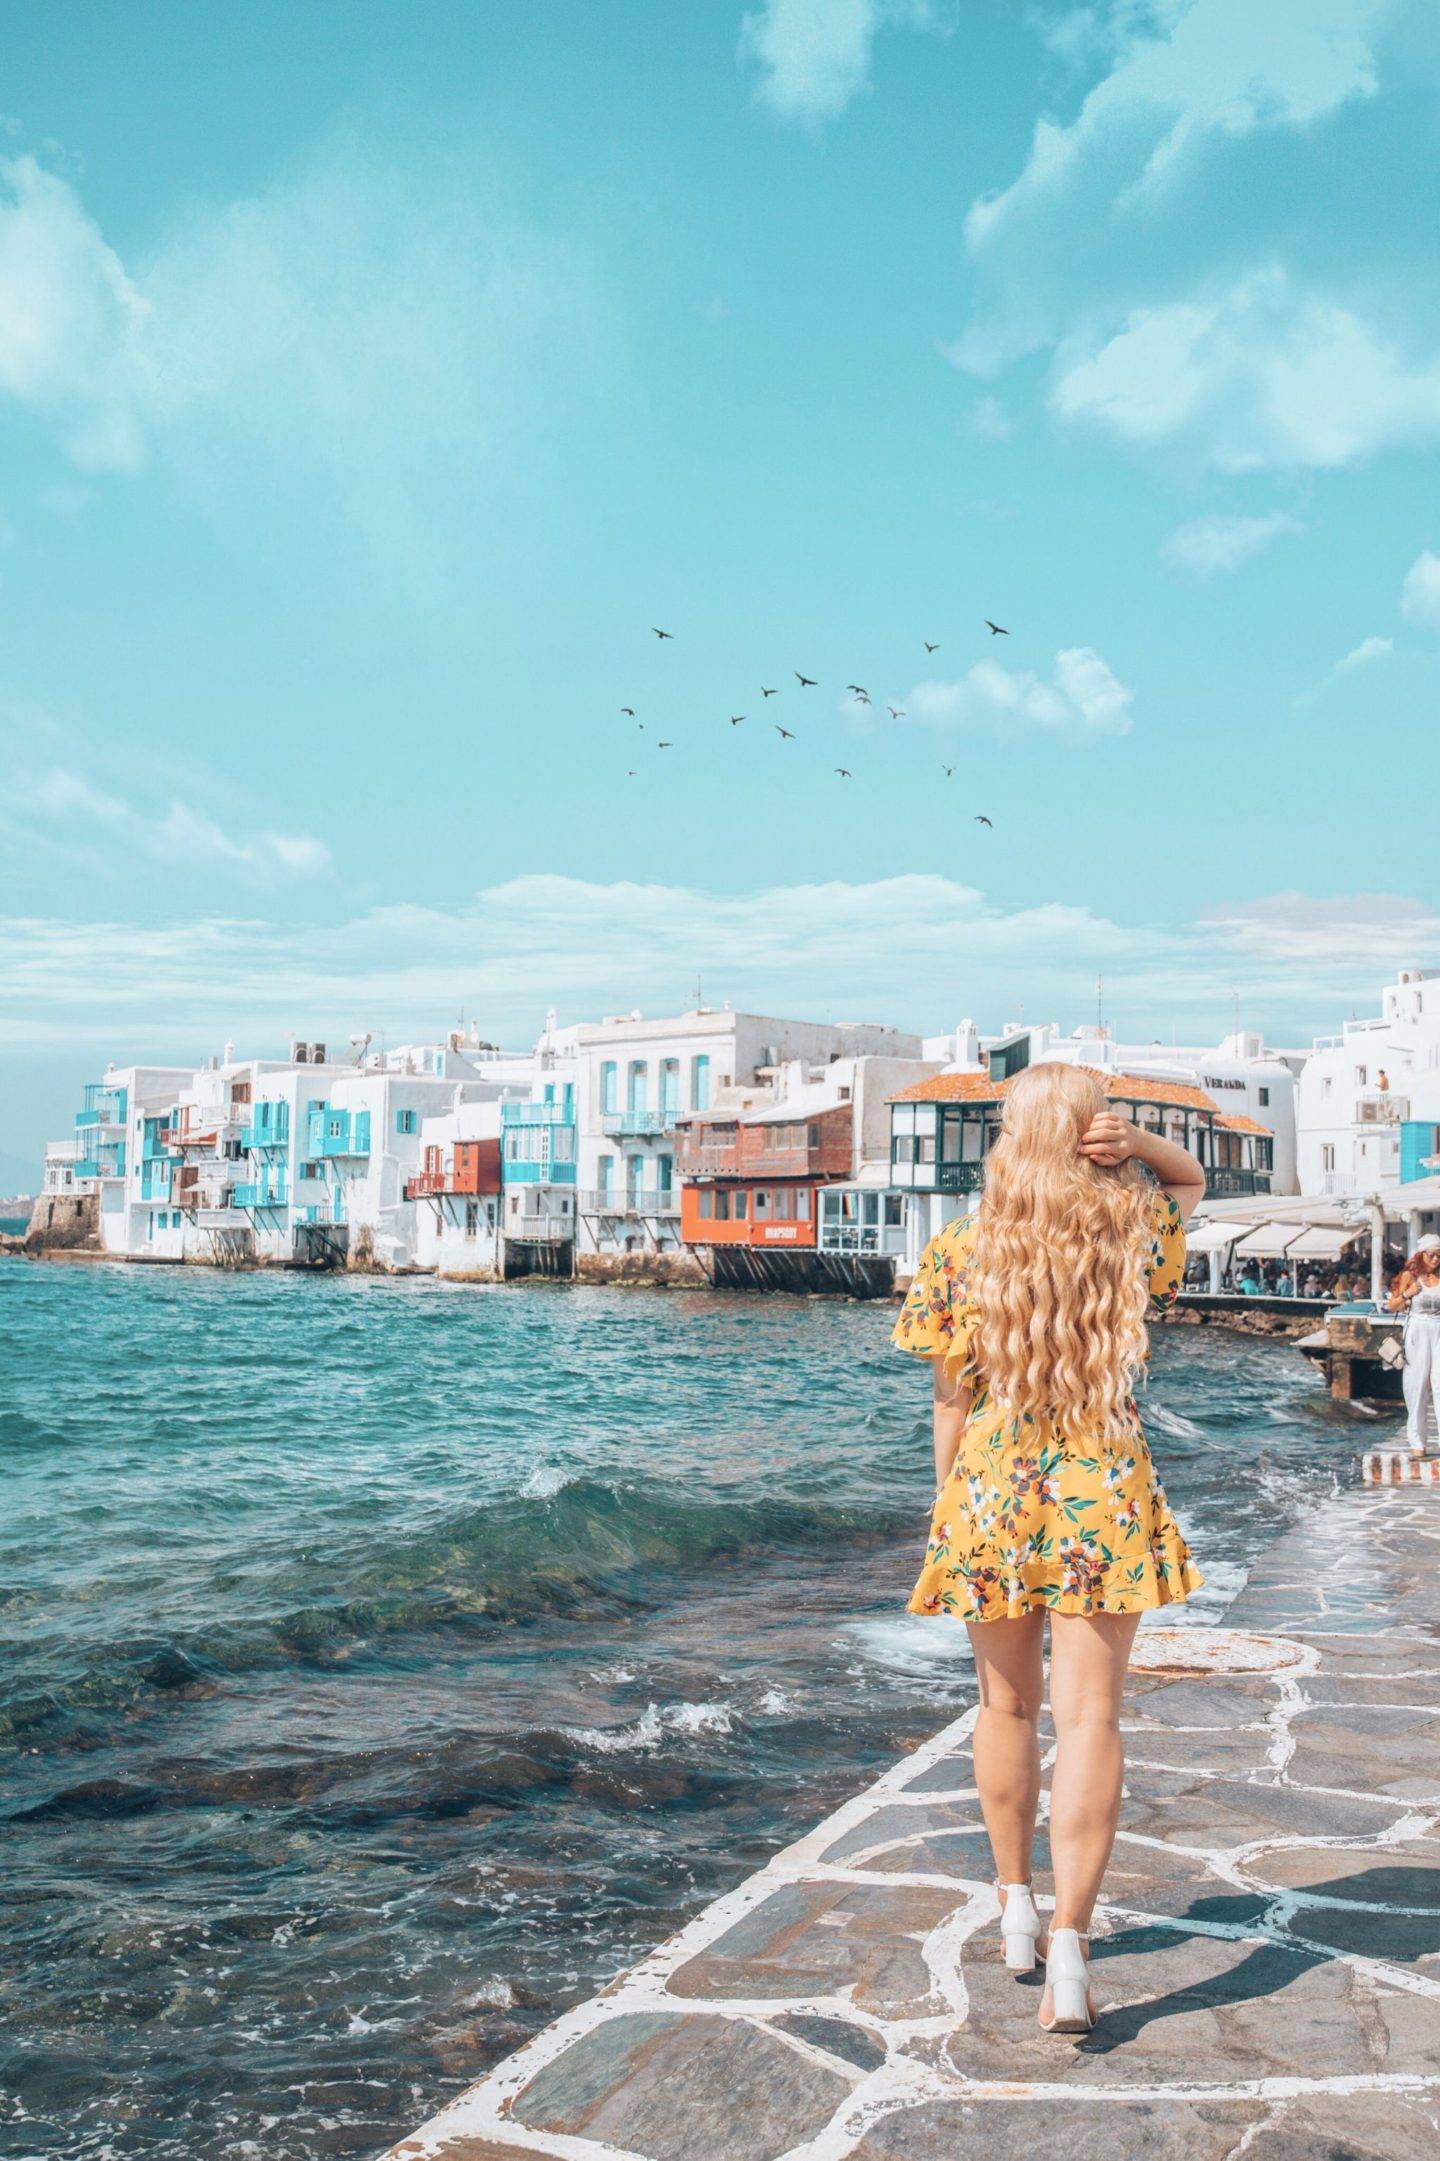 Little Venice is one of the most instagrammable places in Mykonos. Click the photo to see the rest of my list of the most instagrammable places in Mykonos! 